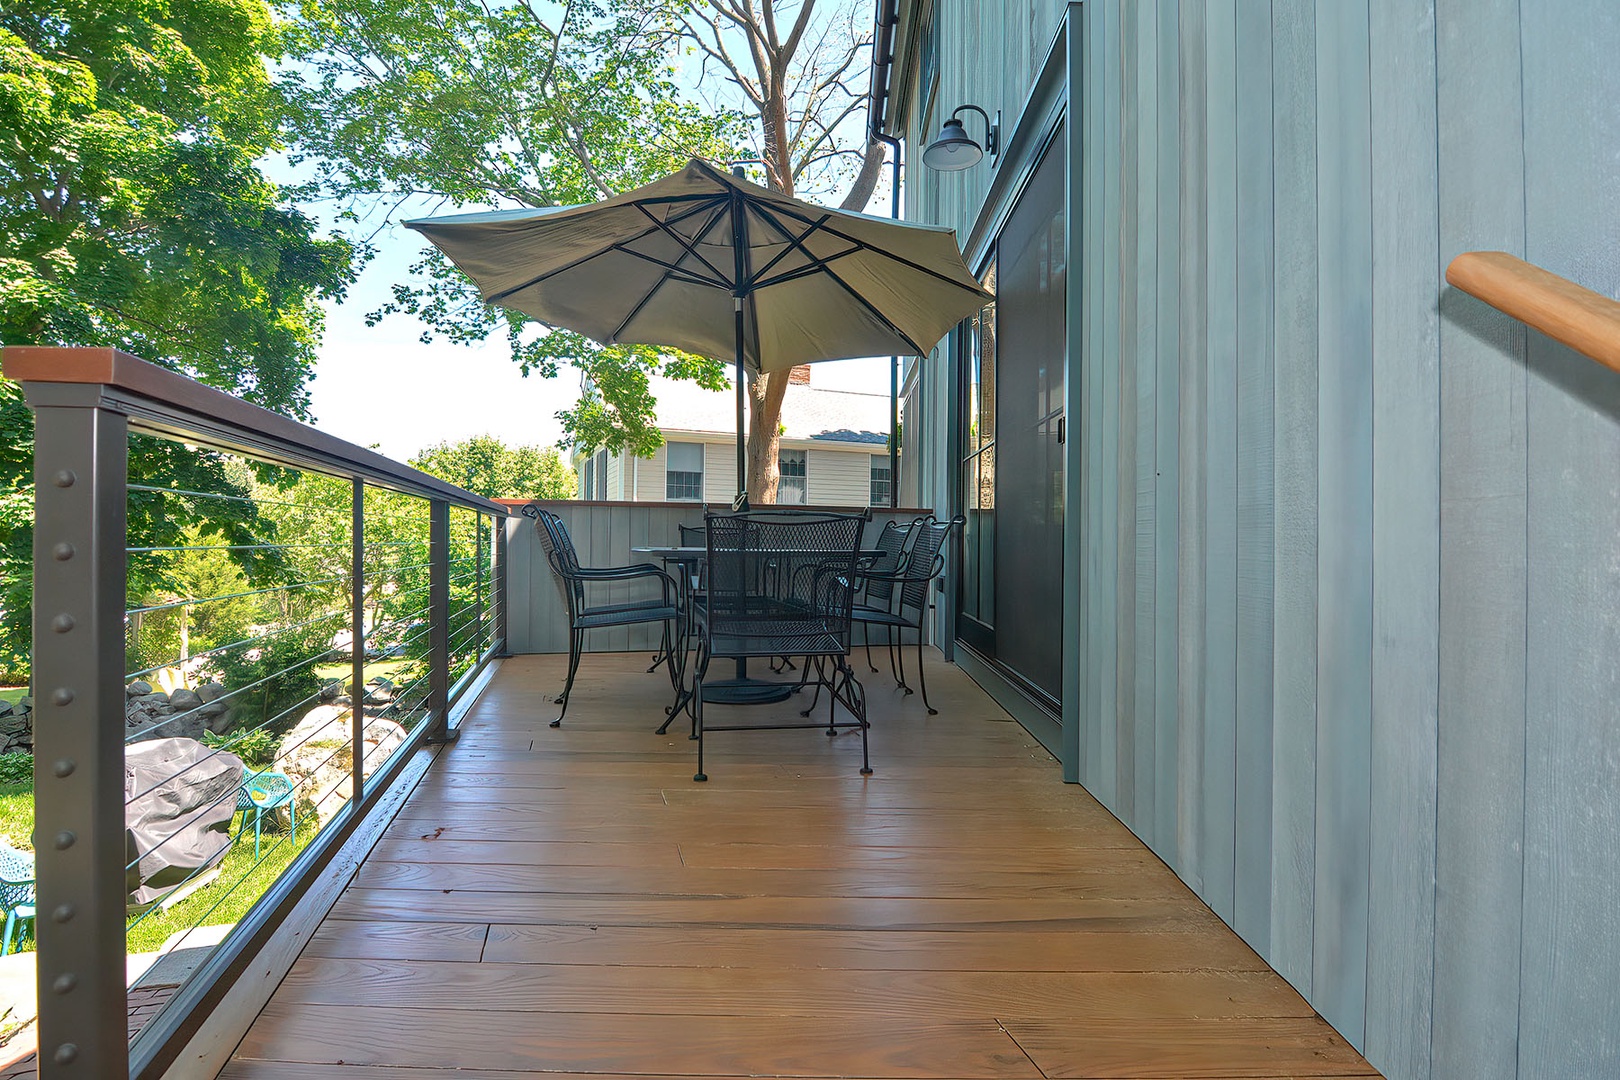 Deck off of the main living area.